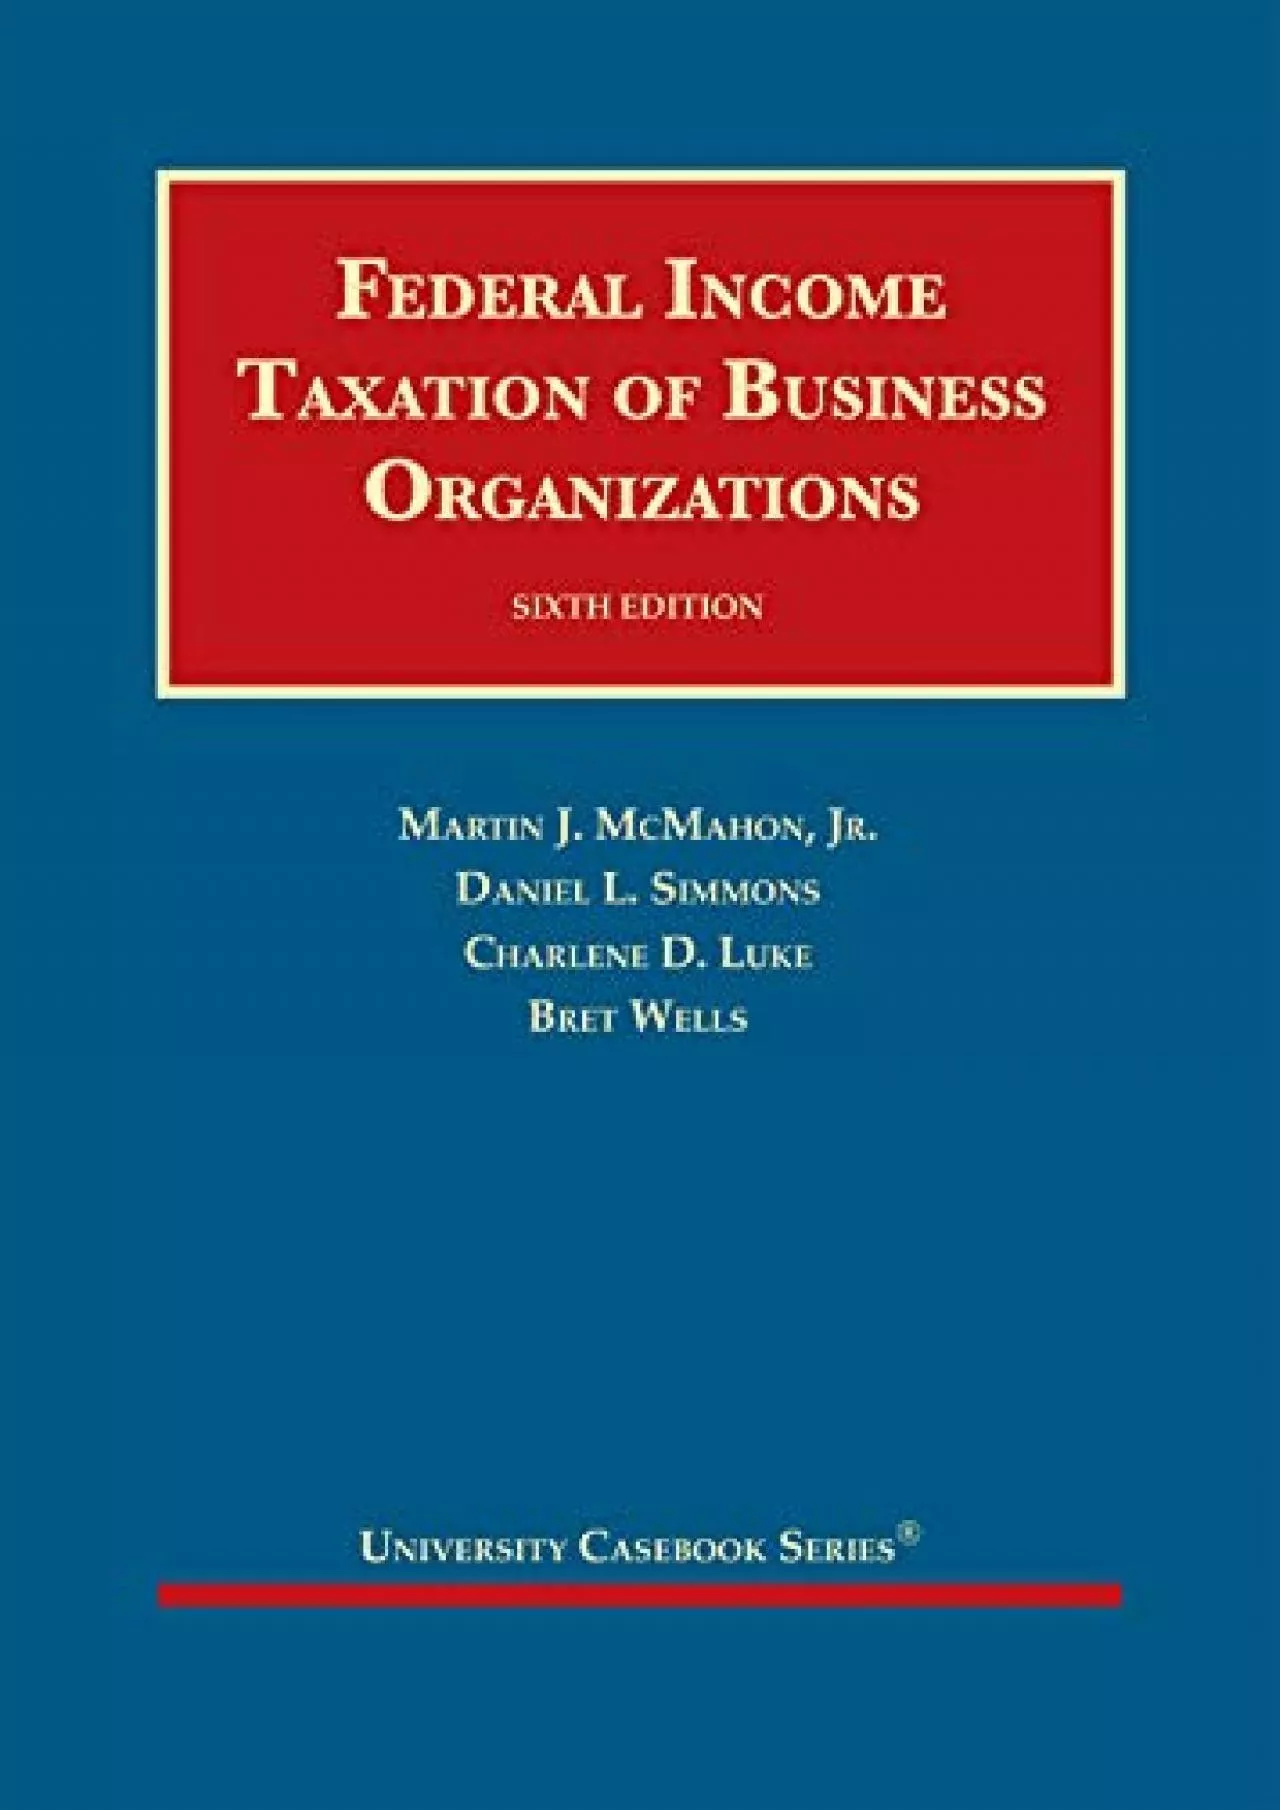 PDF/READ Federal Income Taxation of Business Organizations (University Casebook Series)